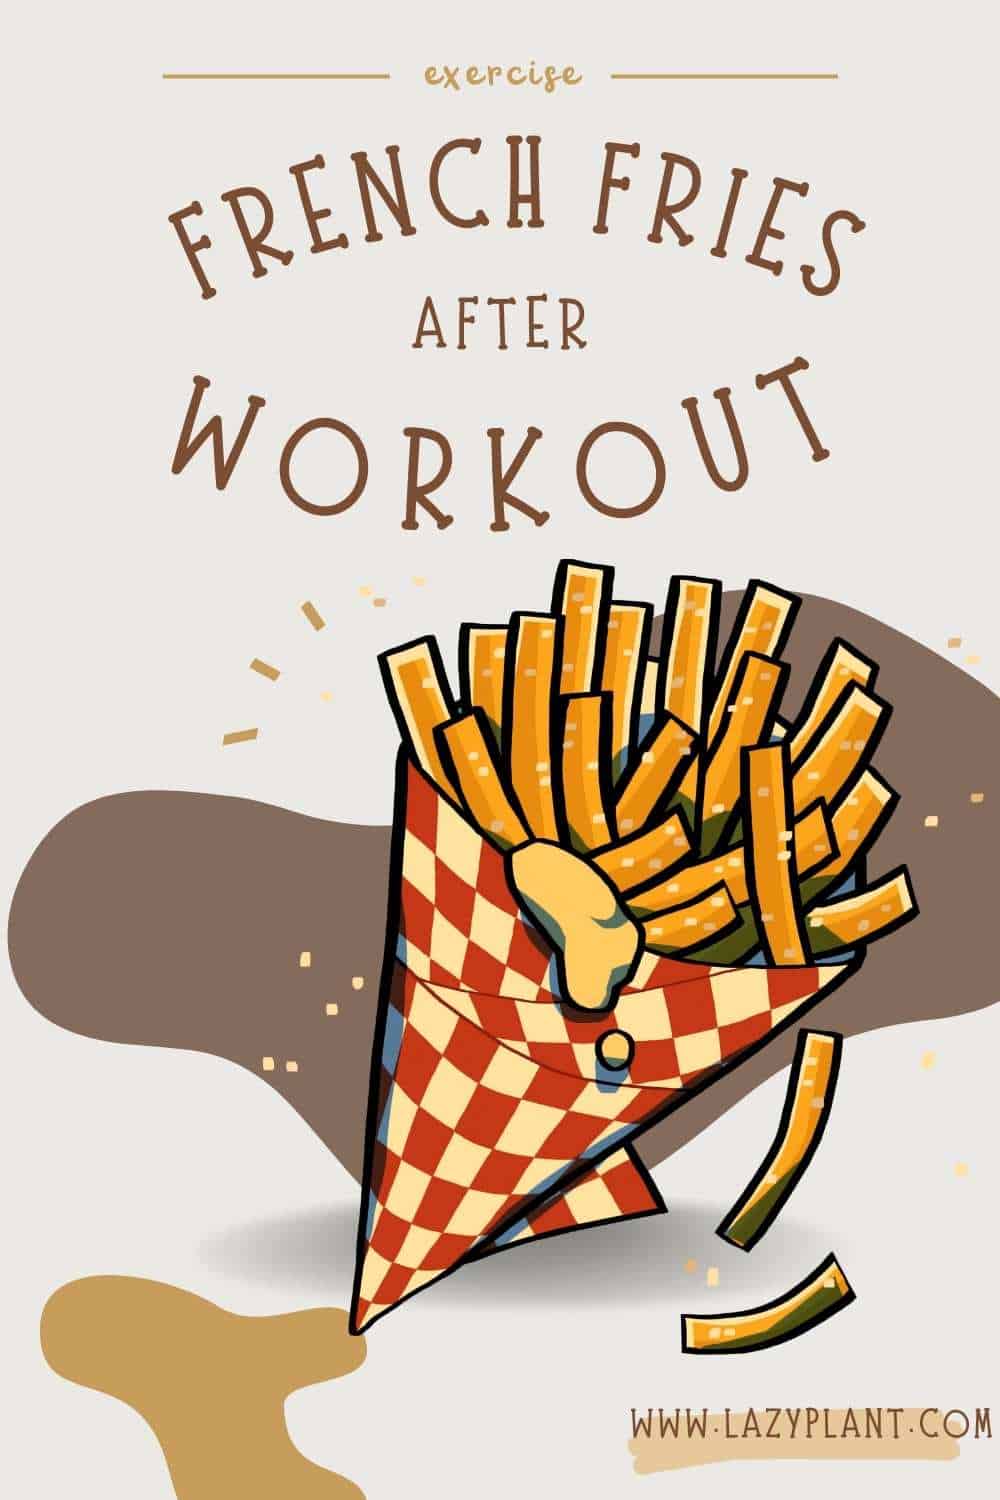 14 reasons why eating French fries is good for athletes!